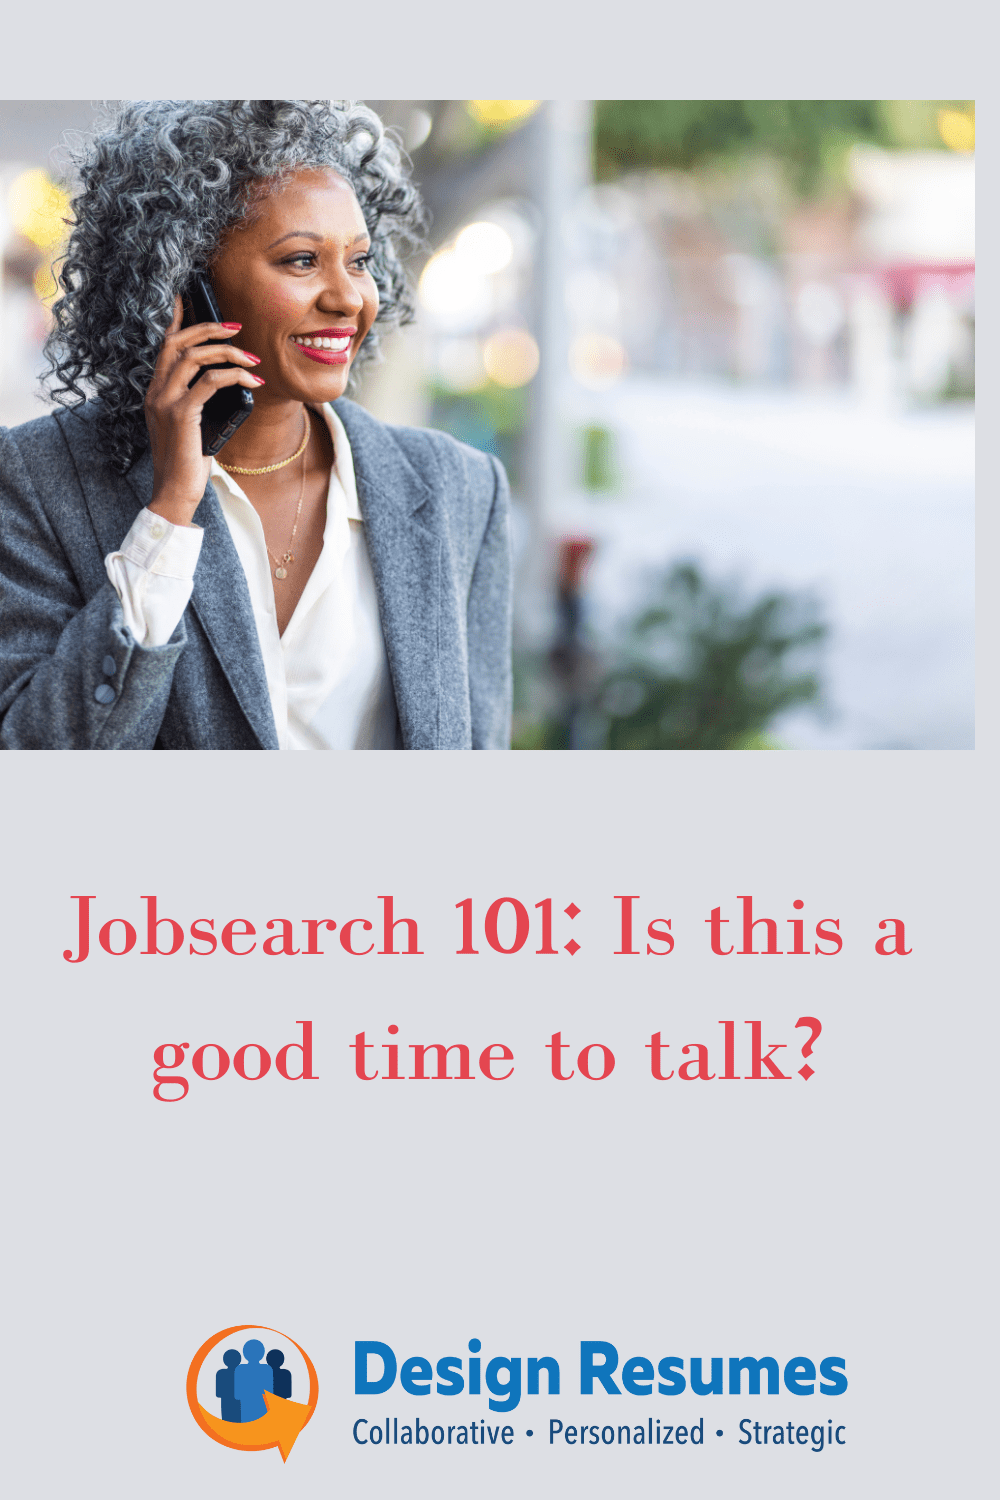 Jobsearch 101: Is this a good time to talk?